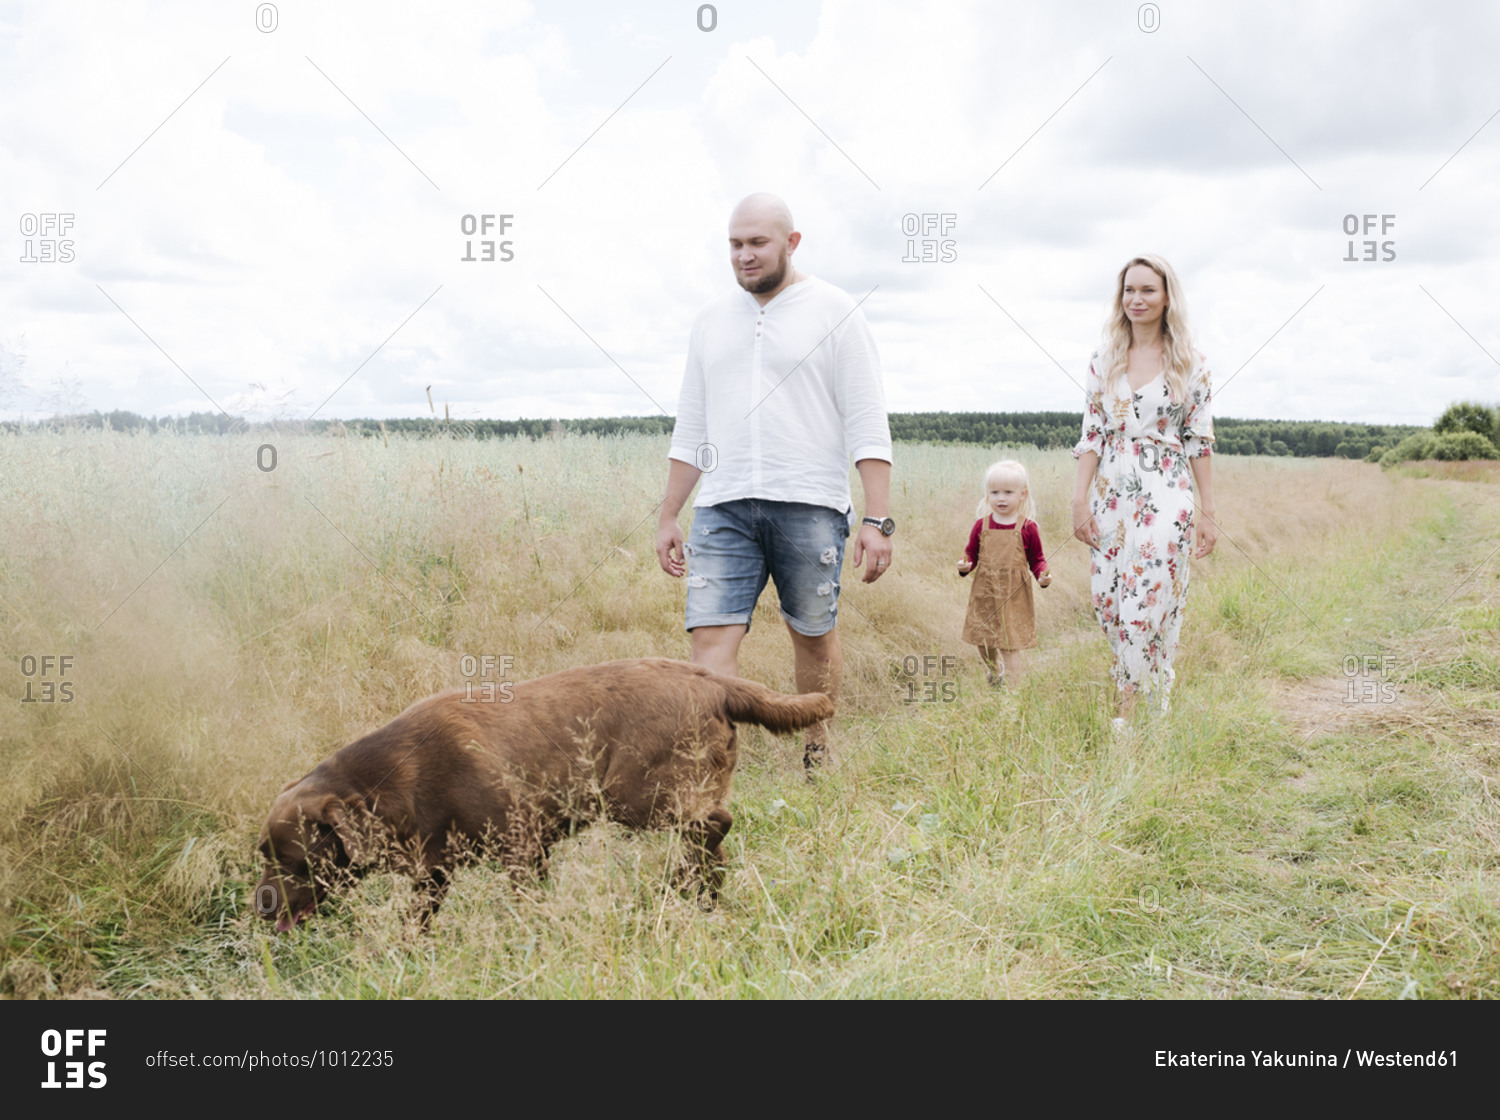 Parents and daughter with Chocolate Labrador walking amidst oats field against cloudy sky